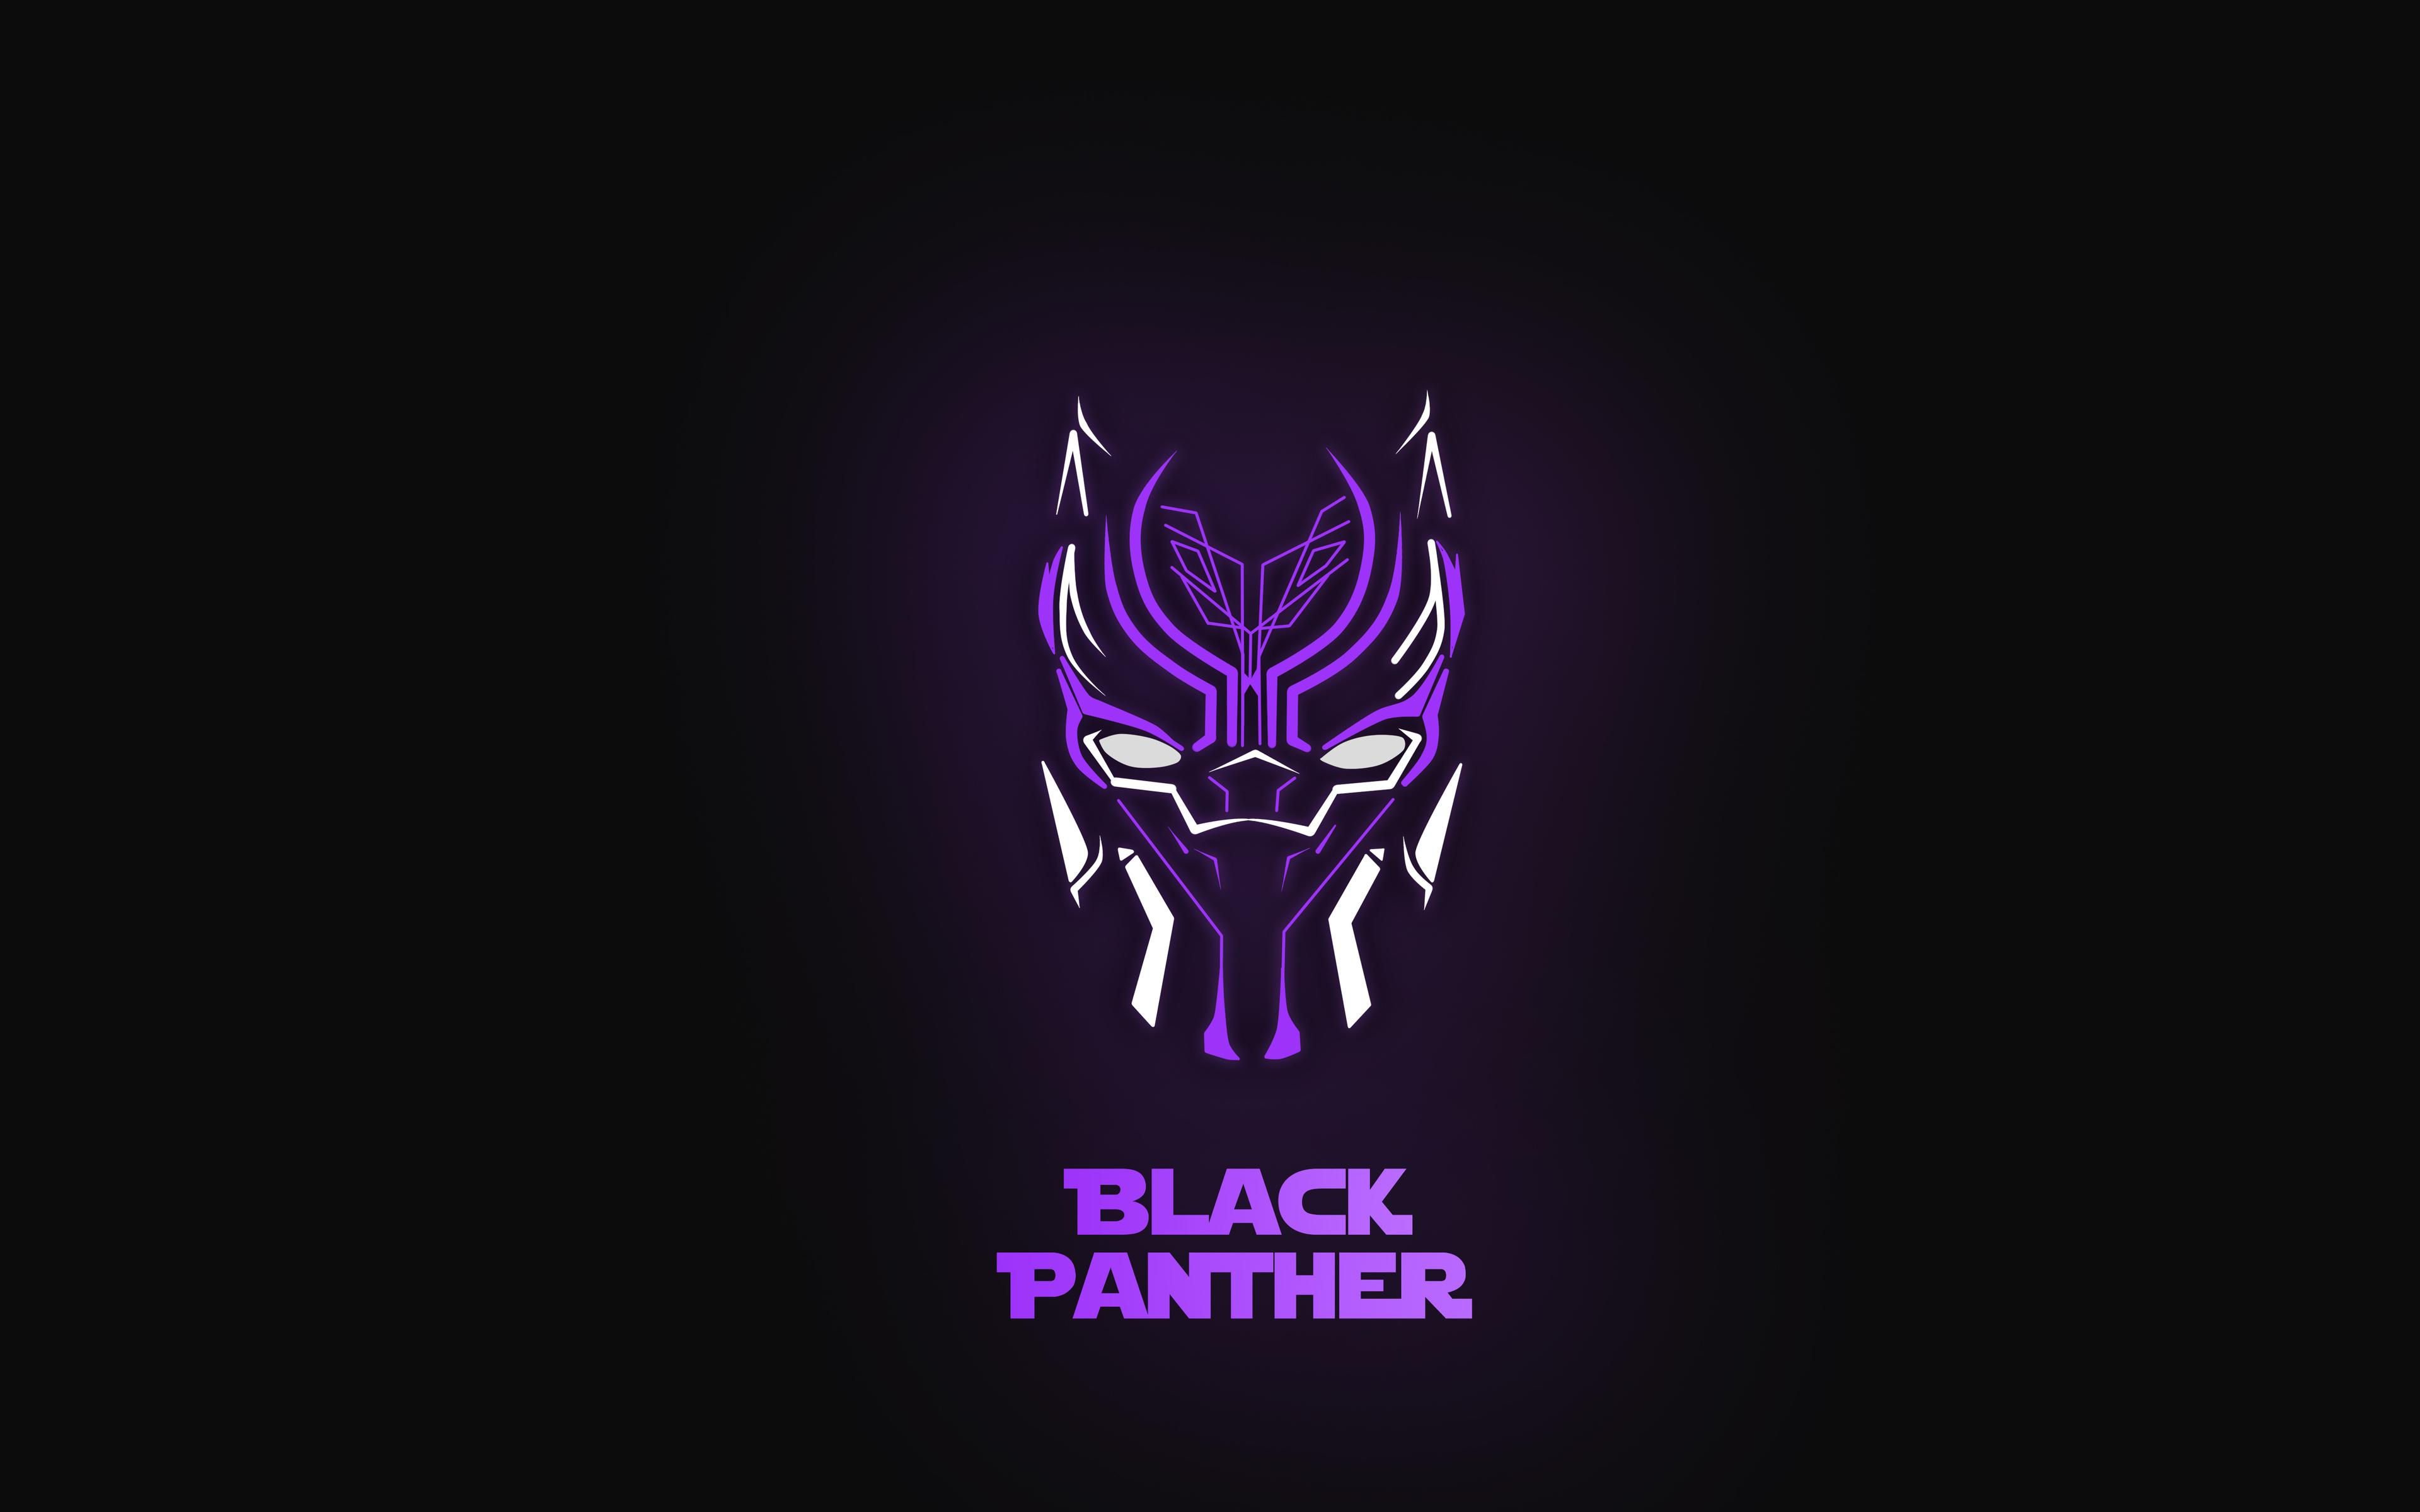 Black Panther Minimal Mask 320x568 Resolution Wallpaper, HD Superheroes 4K Wallpaper, Image, Photo and Background